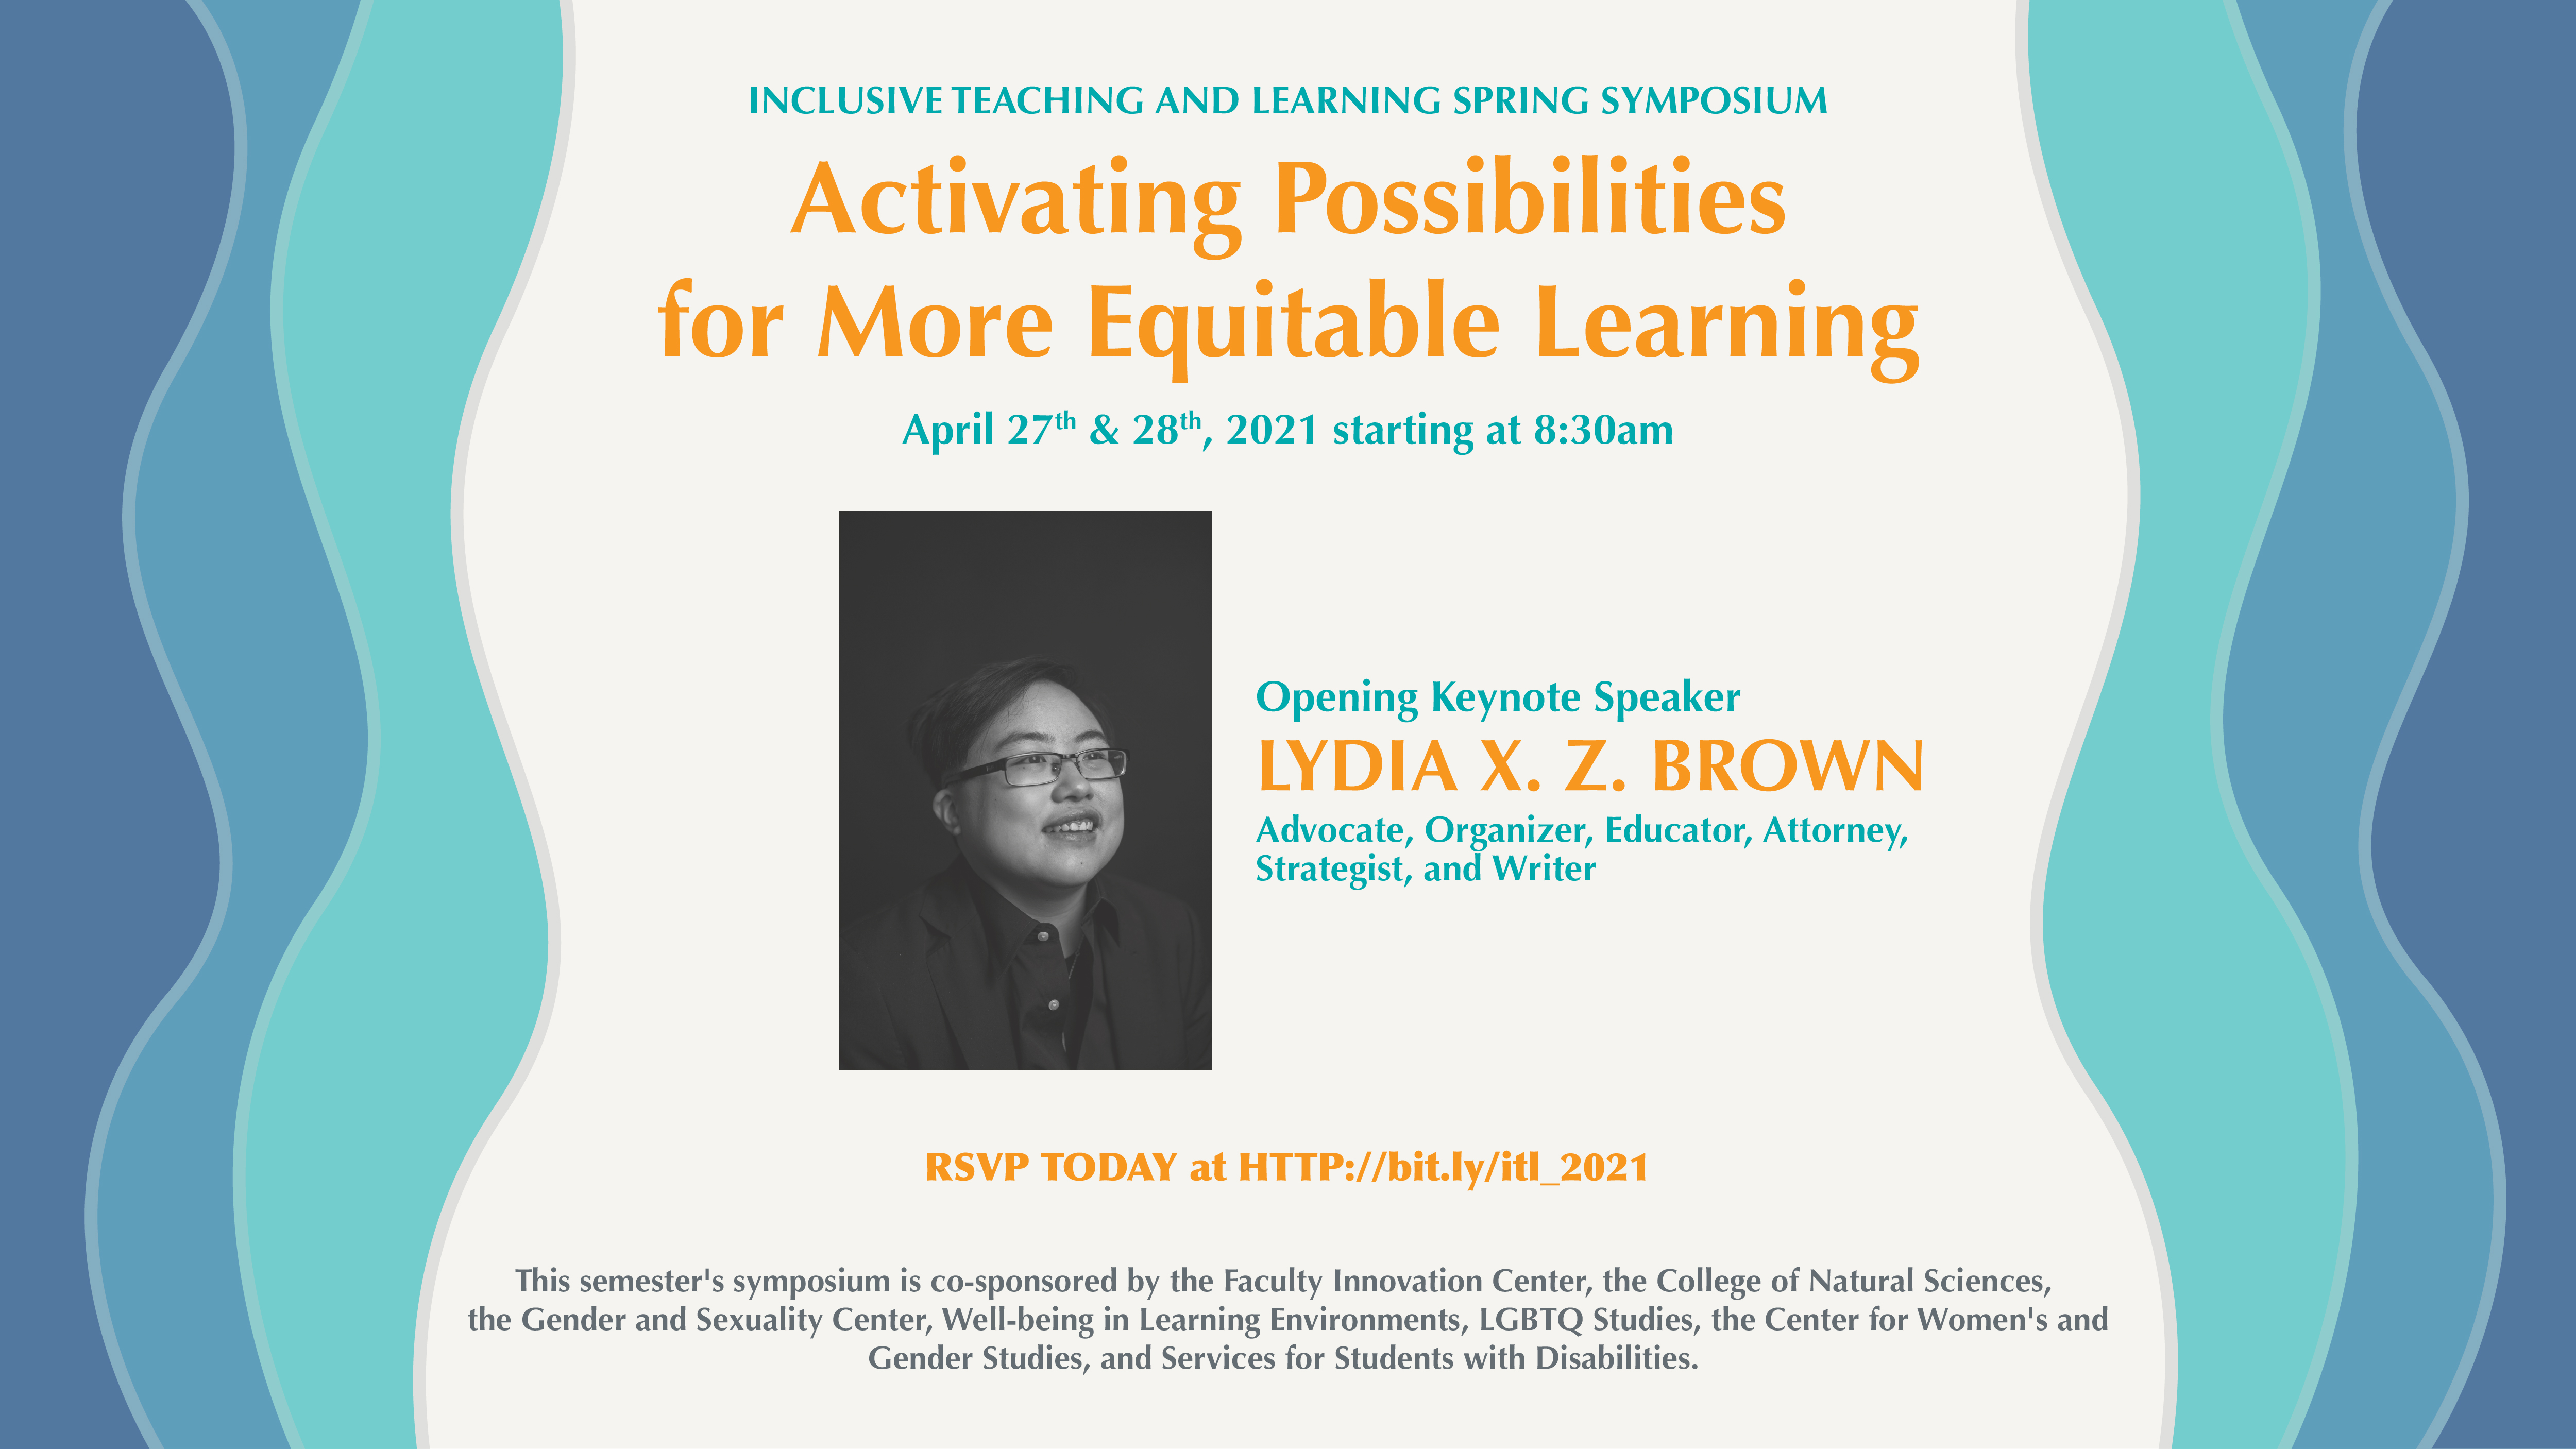 Flyer for ITL Spring Symposium. Blue wavy lines on the left and right borders, which surround a black-and-white image of keynote speaker Lydia X. Z. Brown, a person with short cropped hair wearing a suit and looking off to the side, smiling gently.